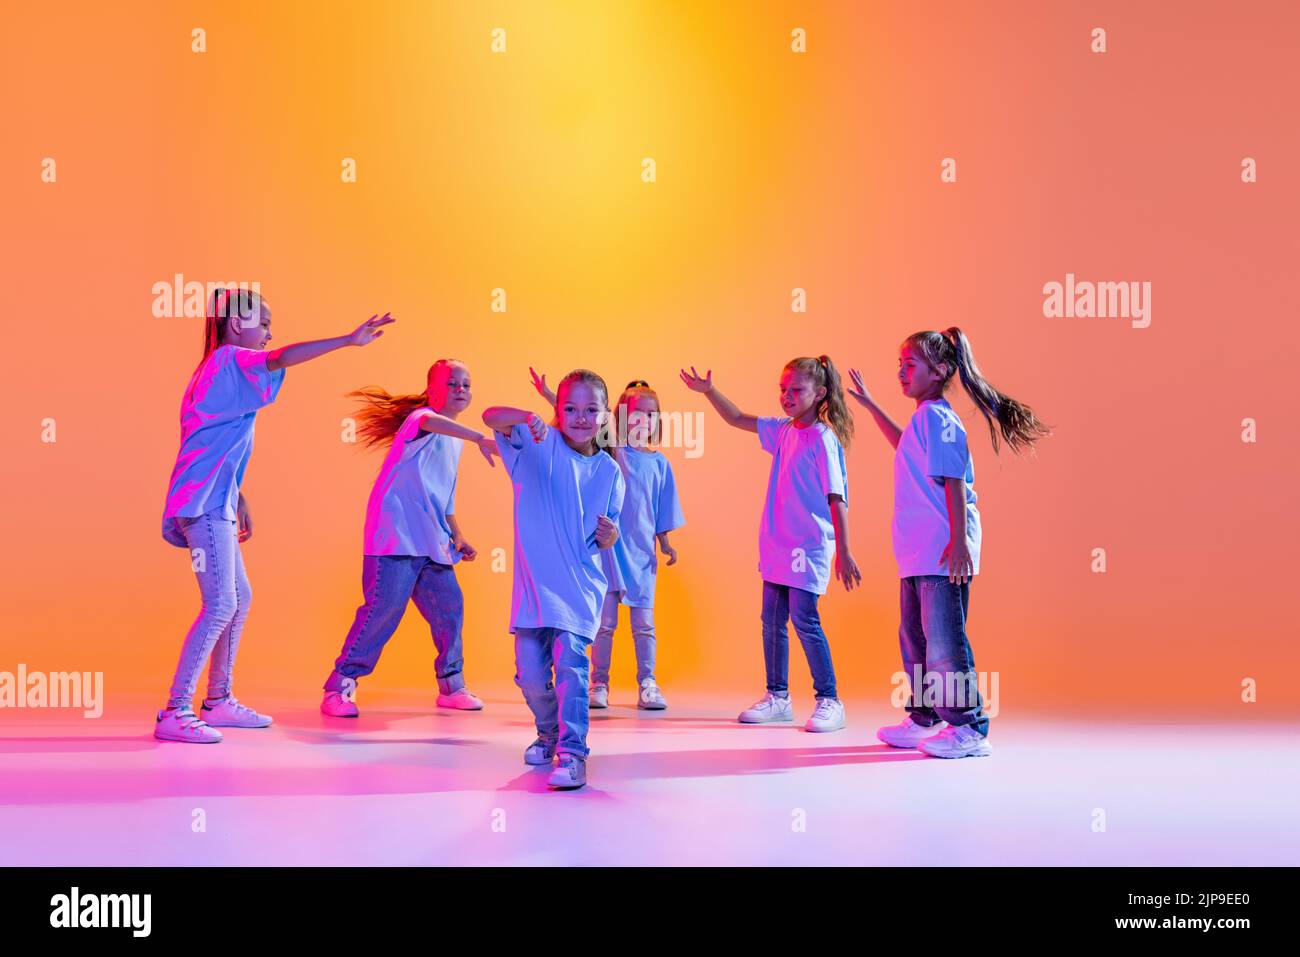 Hip-hop dance, street style. Happy children, little active girls in casual style clothes dancing isolated on orange background in purple neon light. Stock Photo